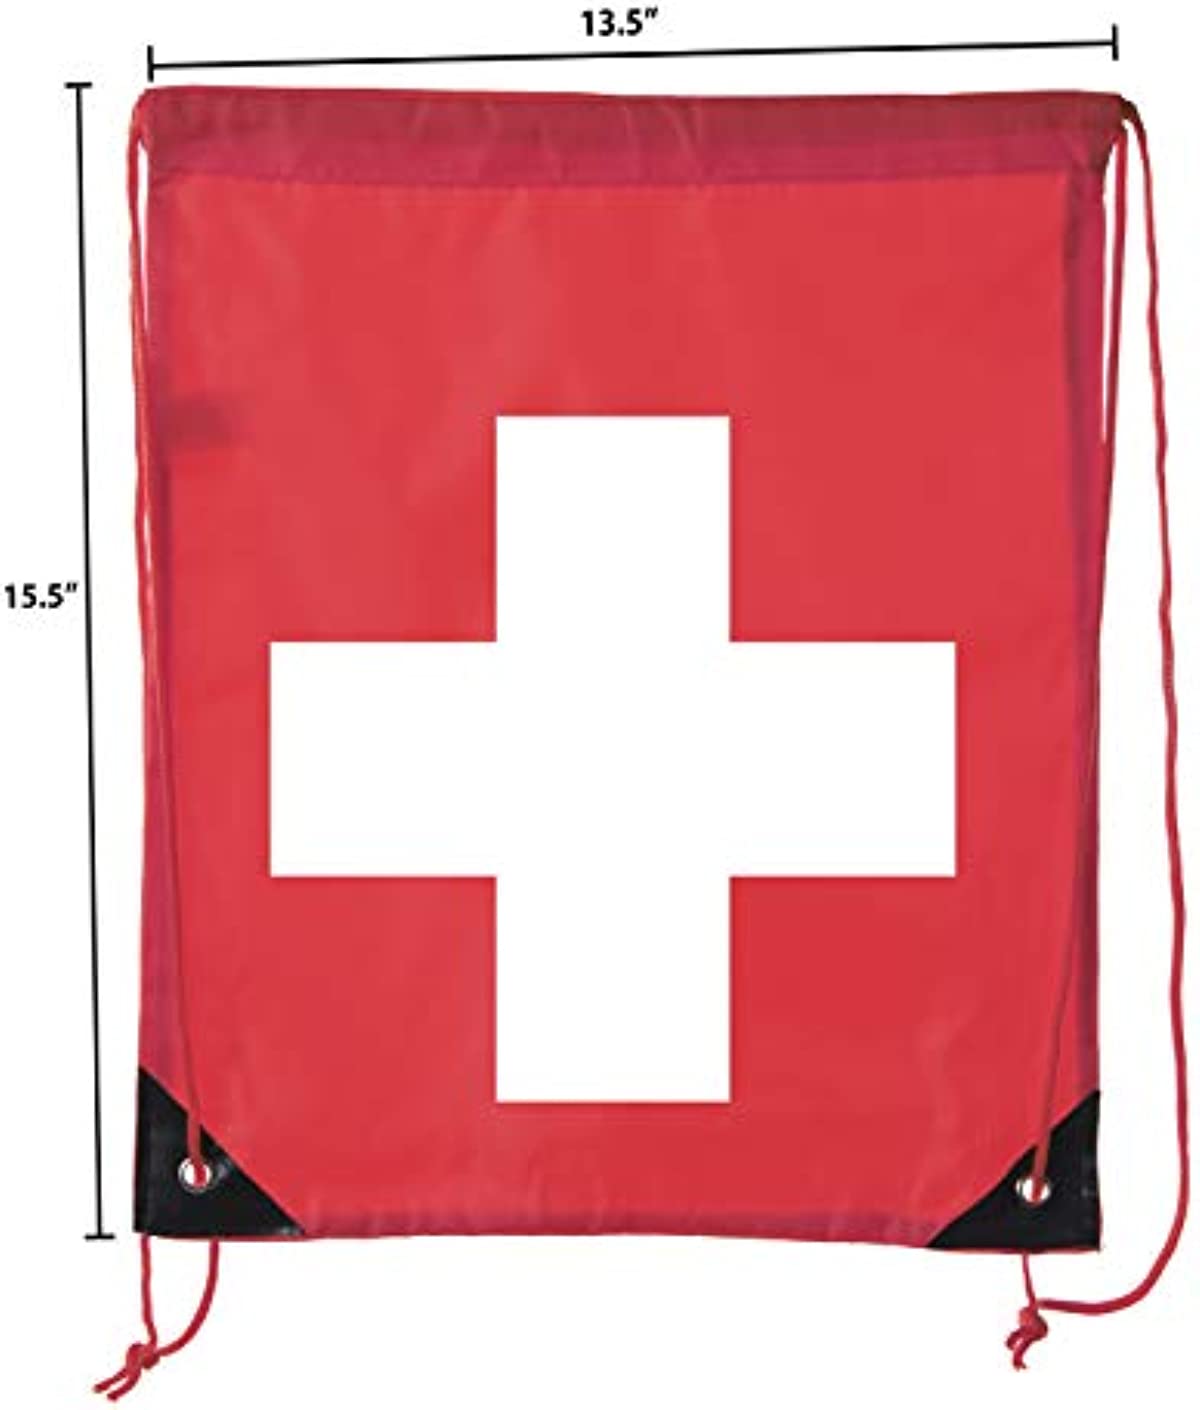 First Aid Backpack Drawstring Medical Bag for Emergencies or Epi Pen & Medicine - 6PK Red CA2500FirstAid S5